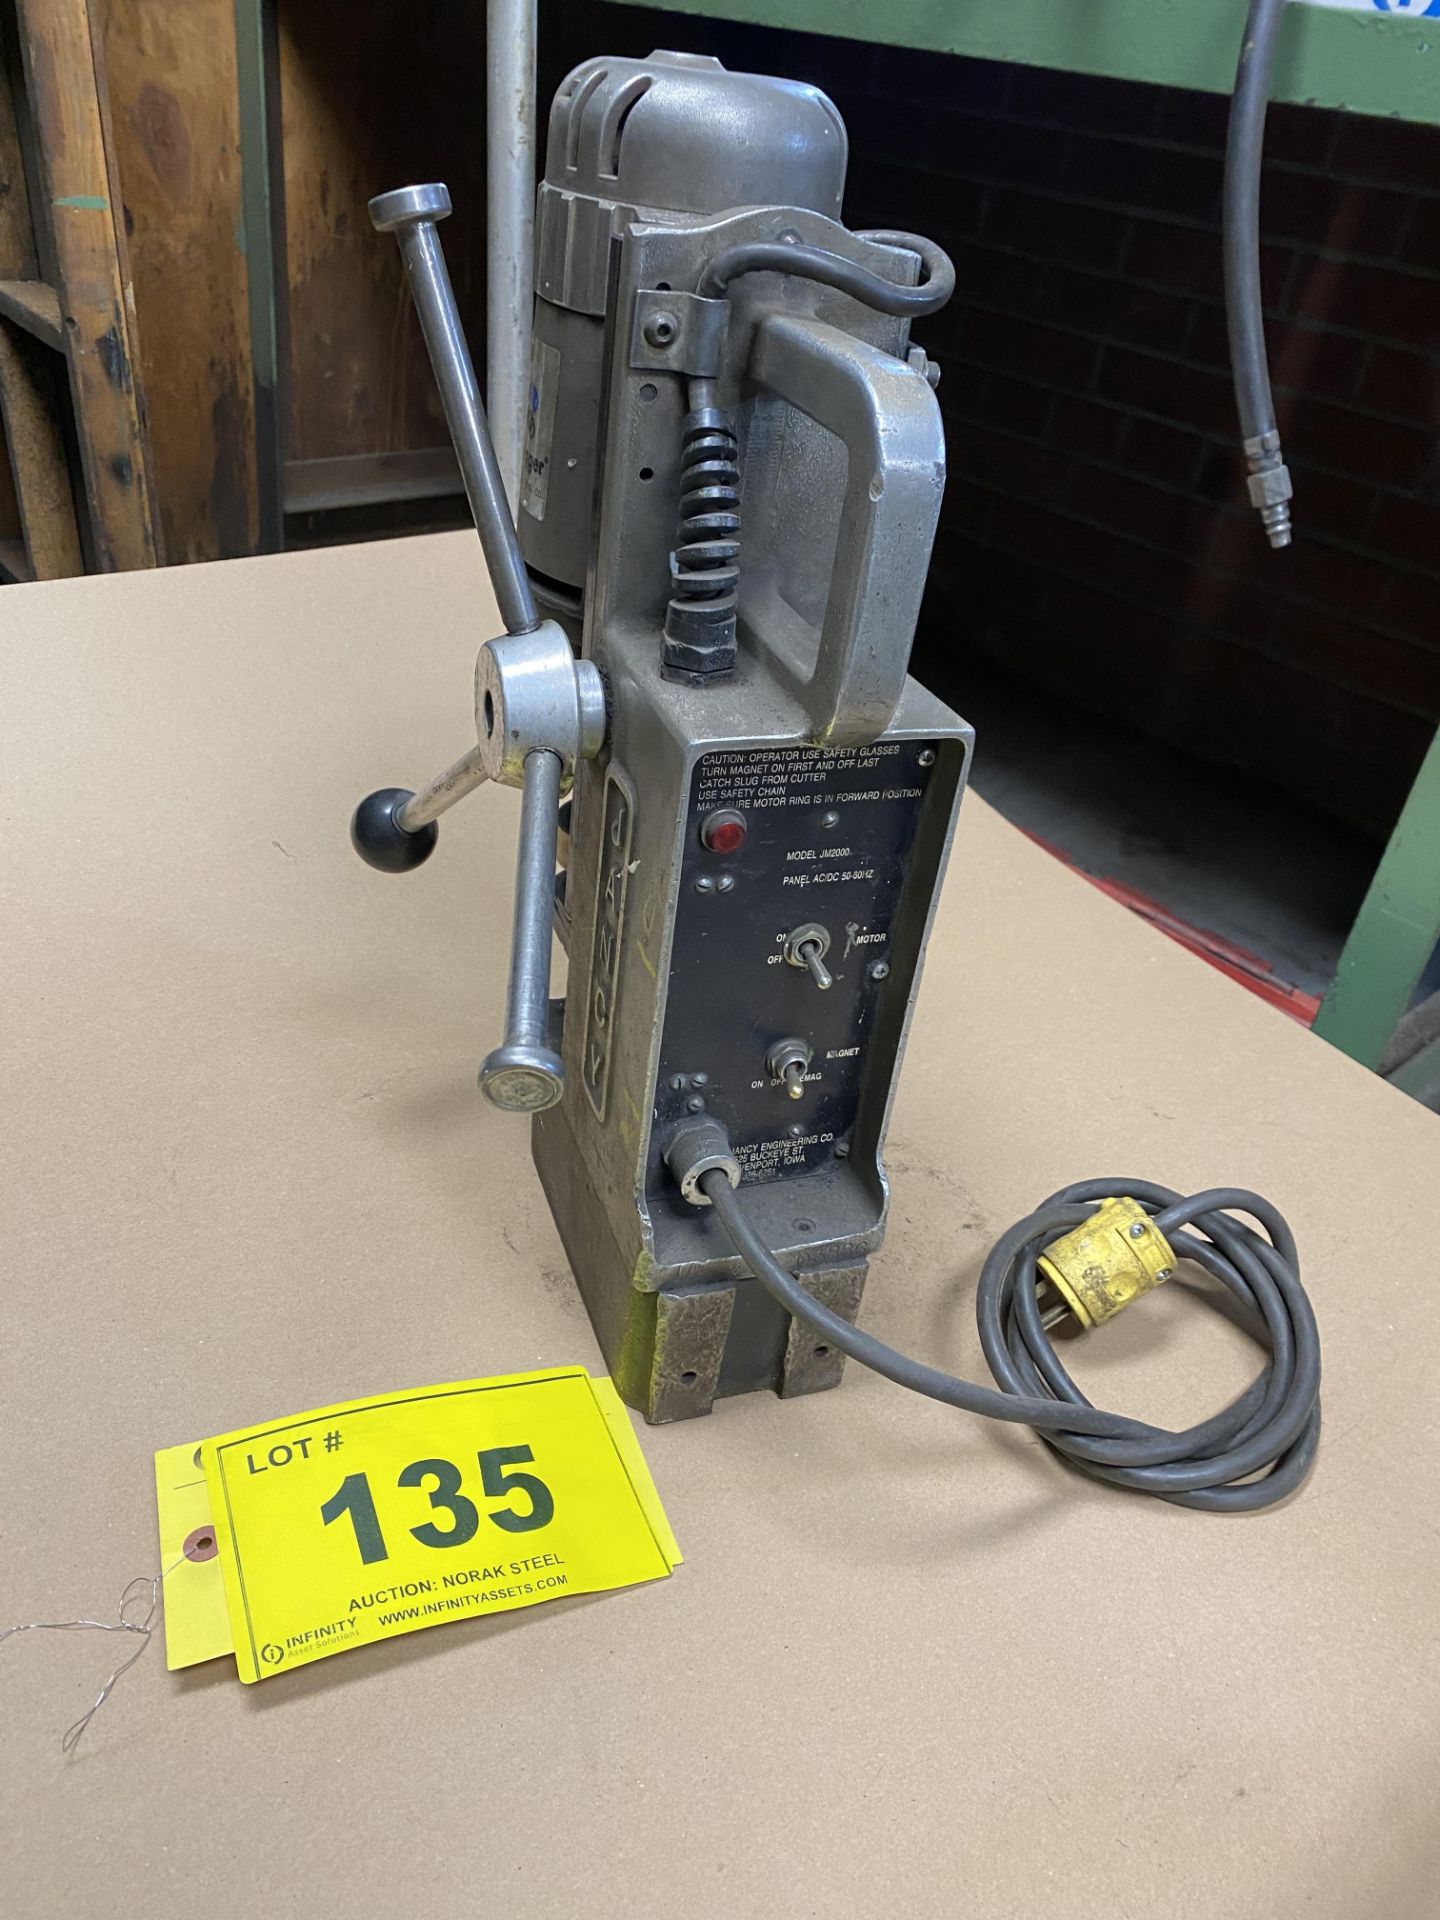 JANCY ENGINEERING SLUGGER MAGNETIC DRILL PRESS - Image 2 of 2